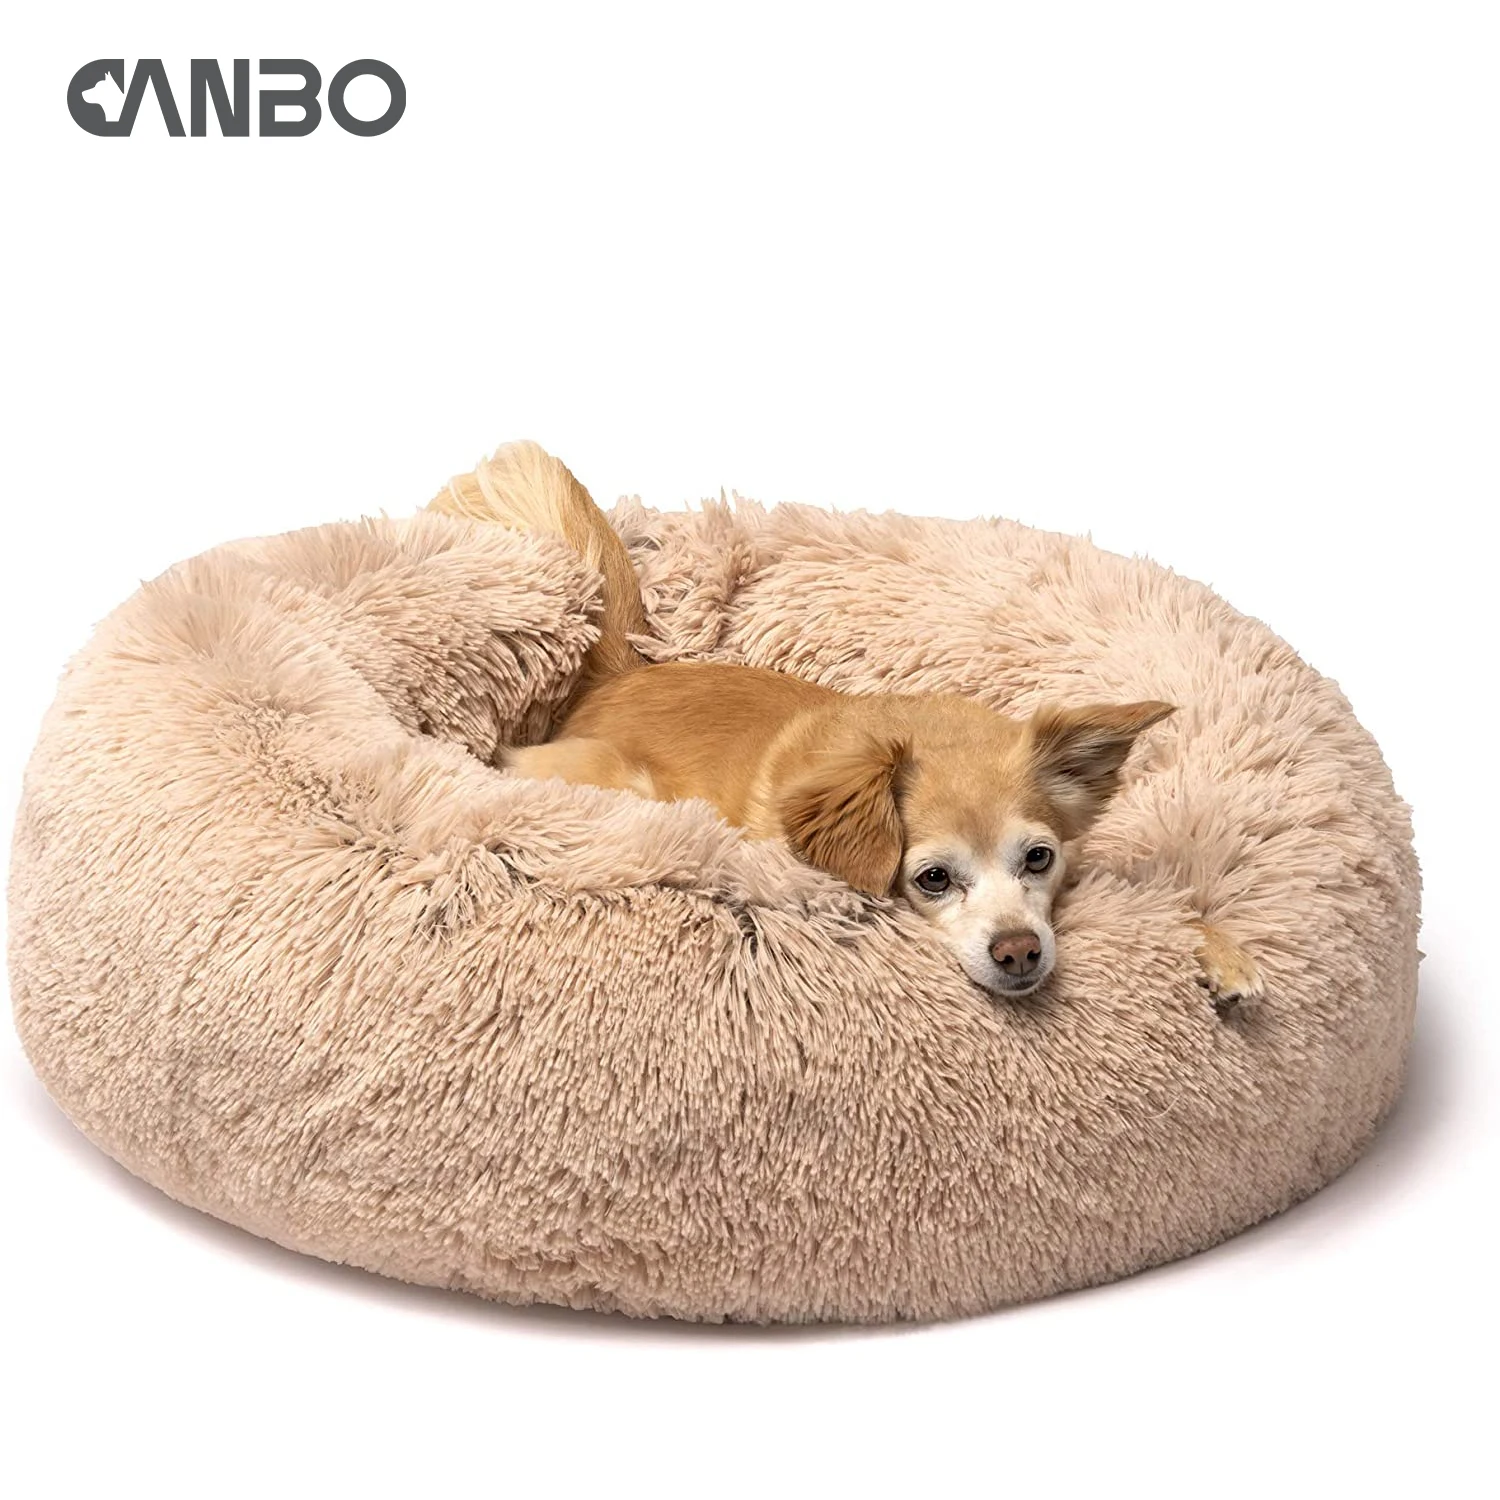 

Luxury Comfortable Donut round dog bed Washable Winter warming deep sleep bed for Cats Dogs cama para mascotas gatos perros, 13 colors